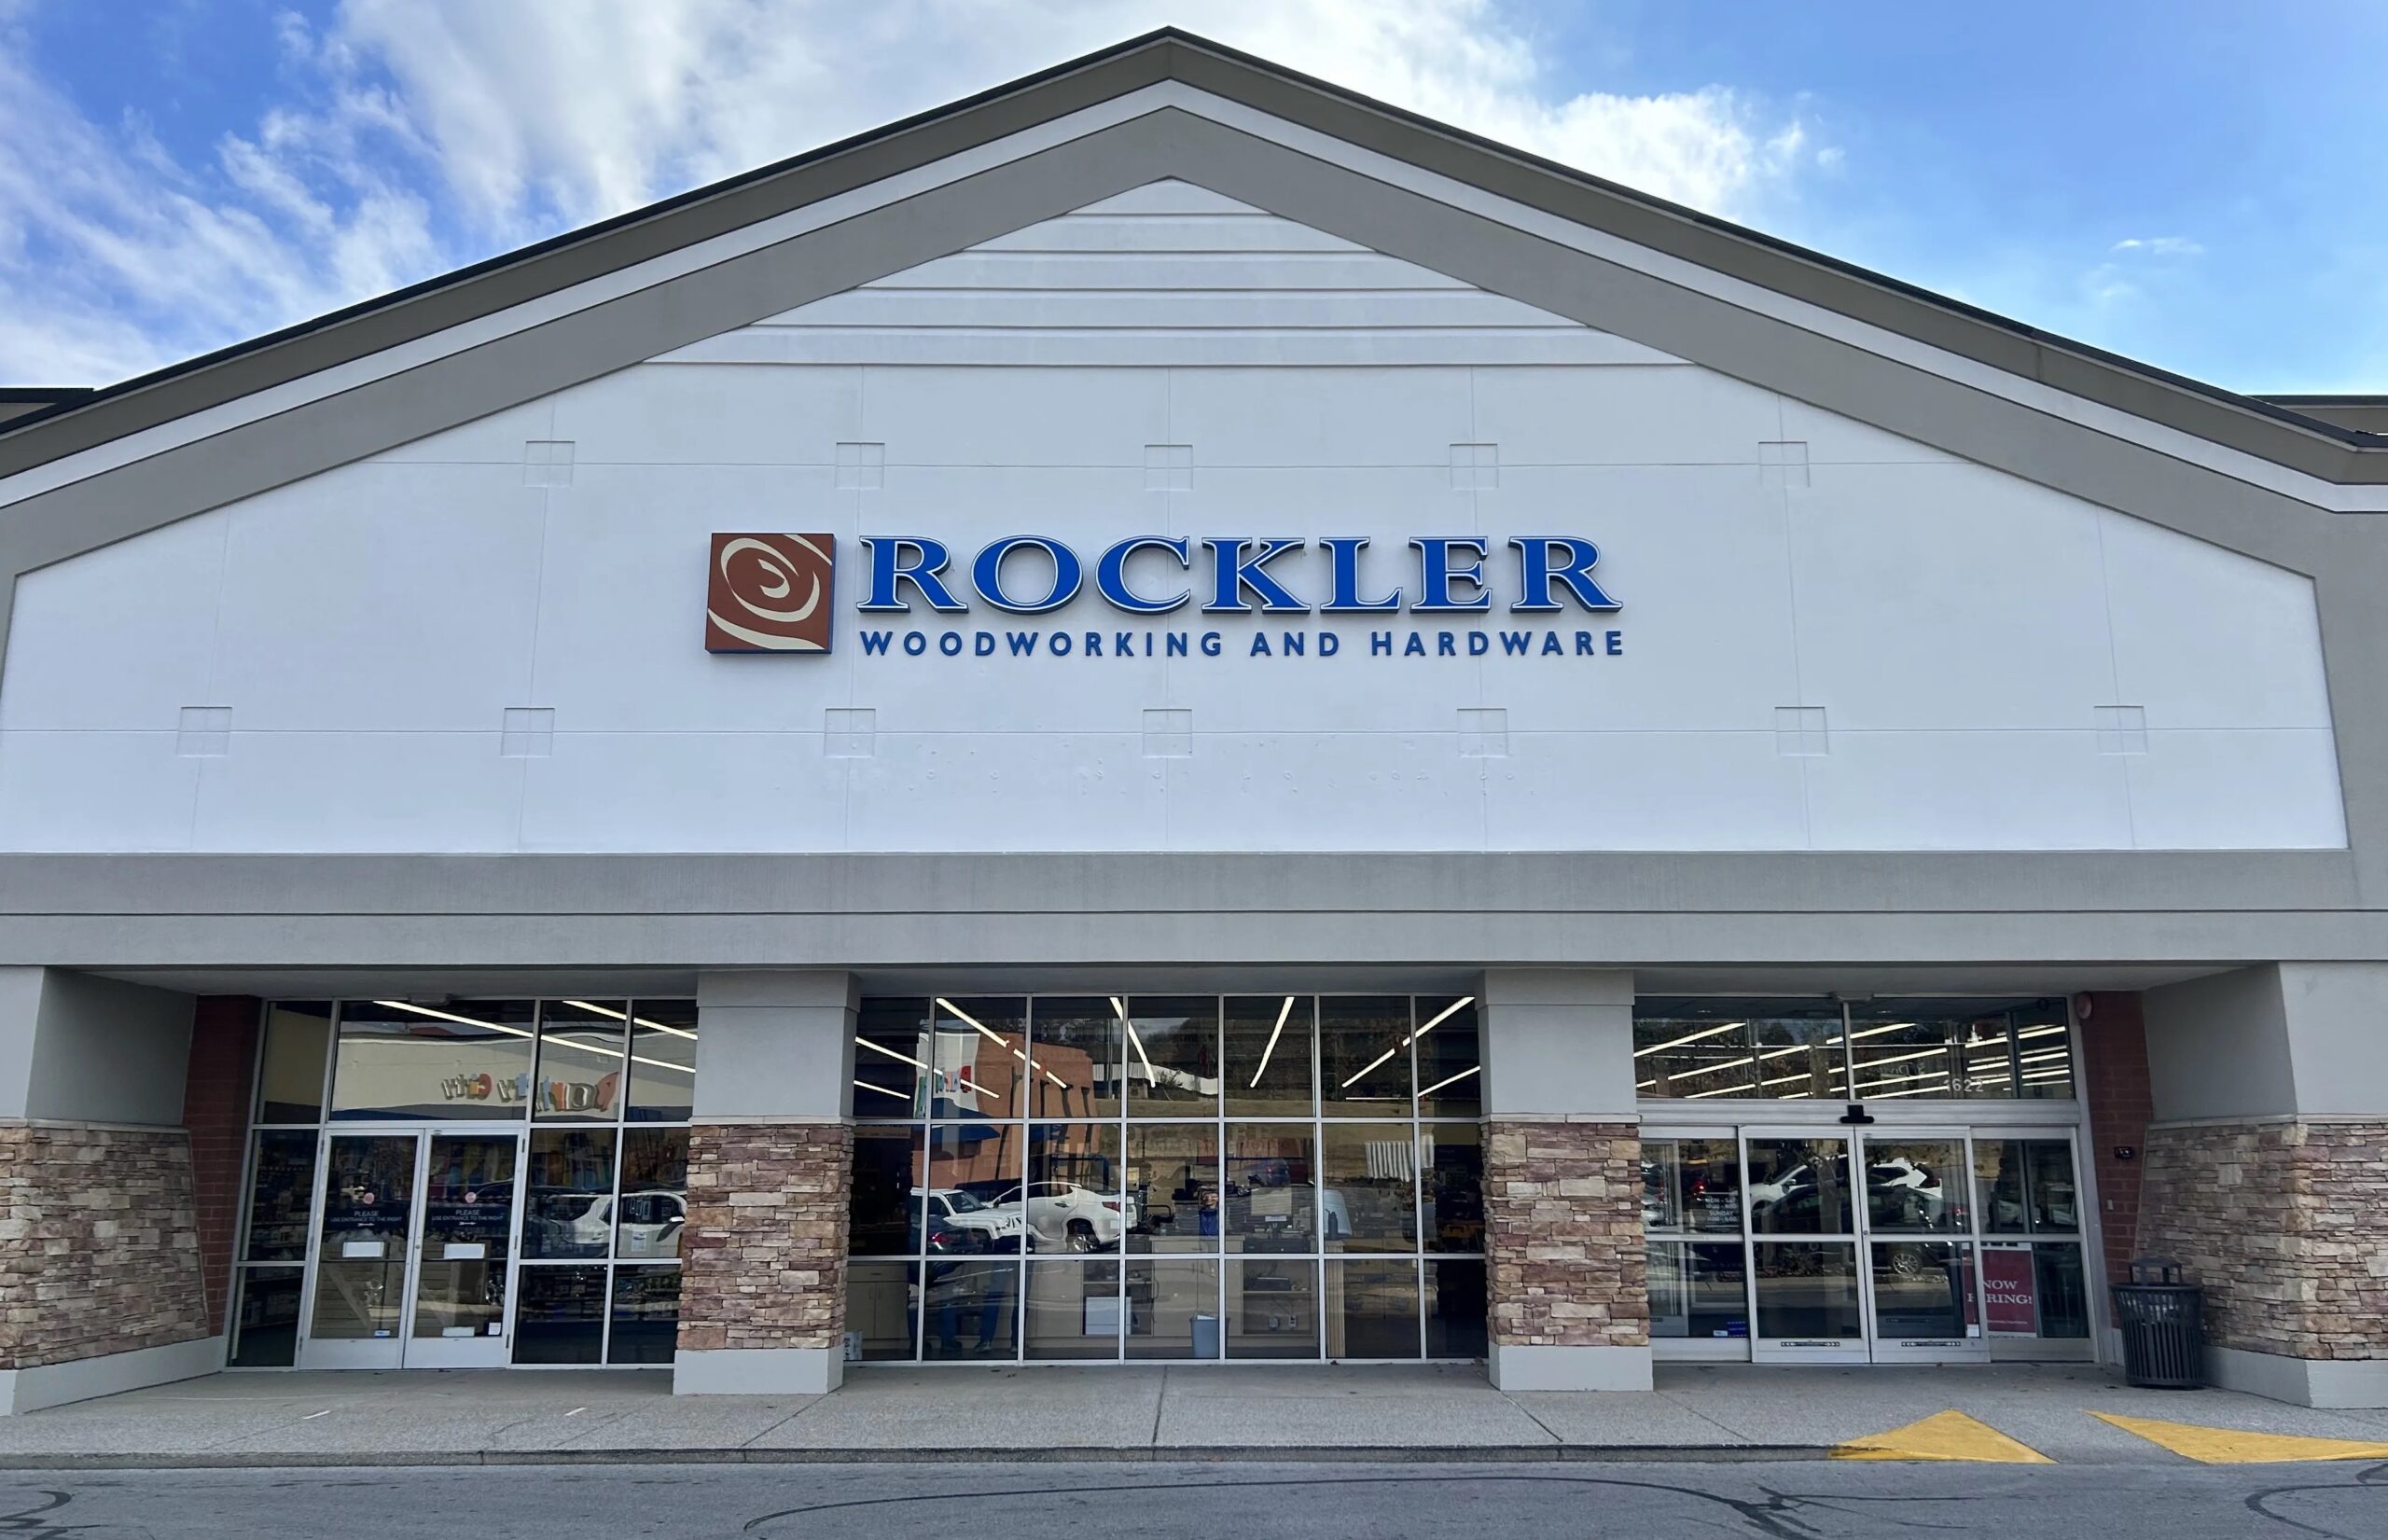 Rockler Woodworking and Hardware store in Brentwood Tennessee.